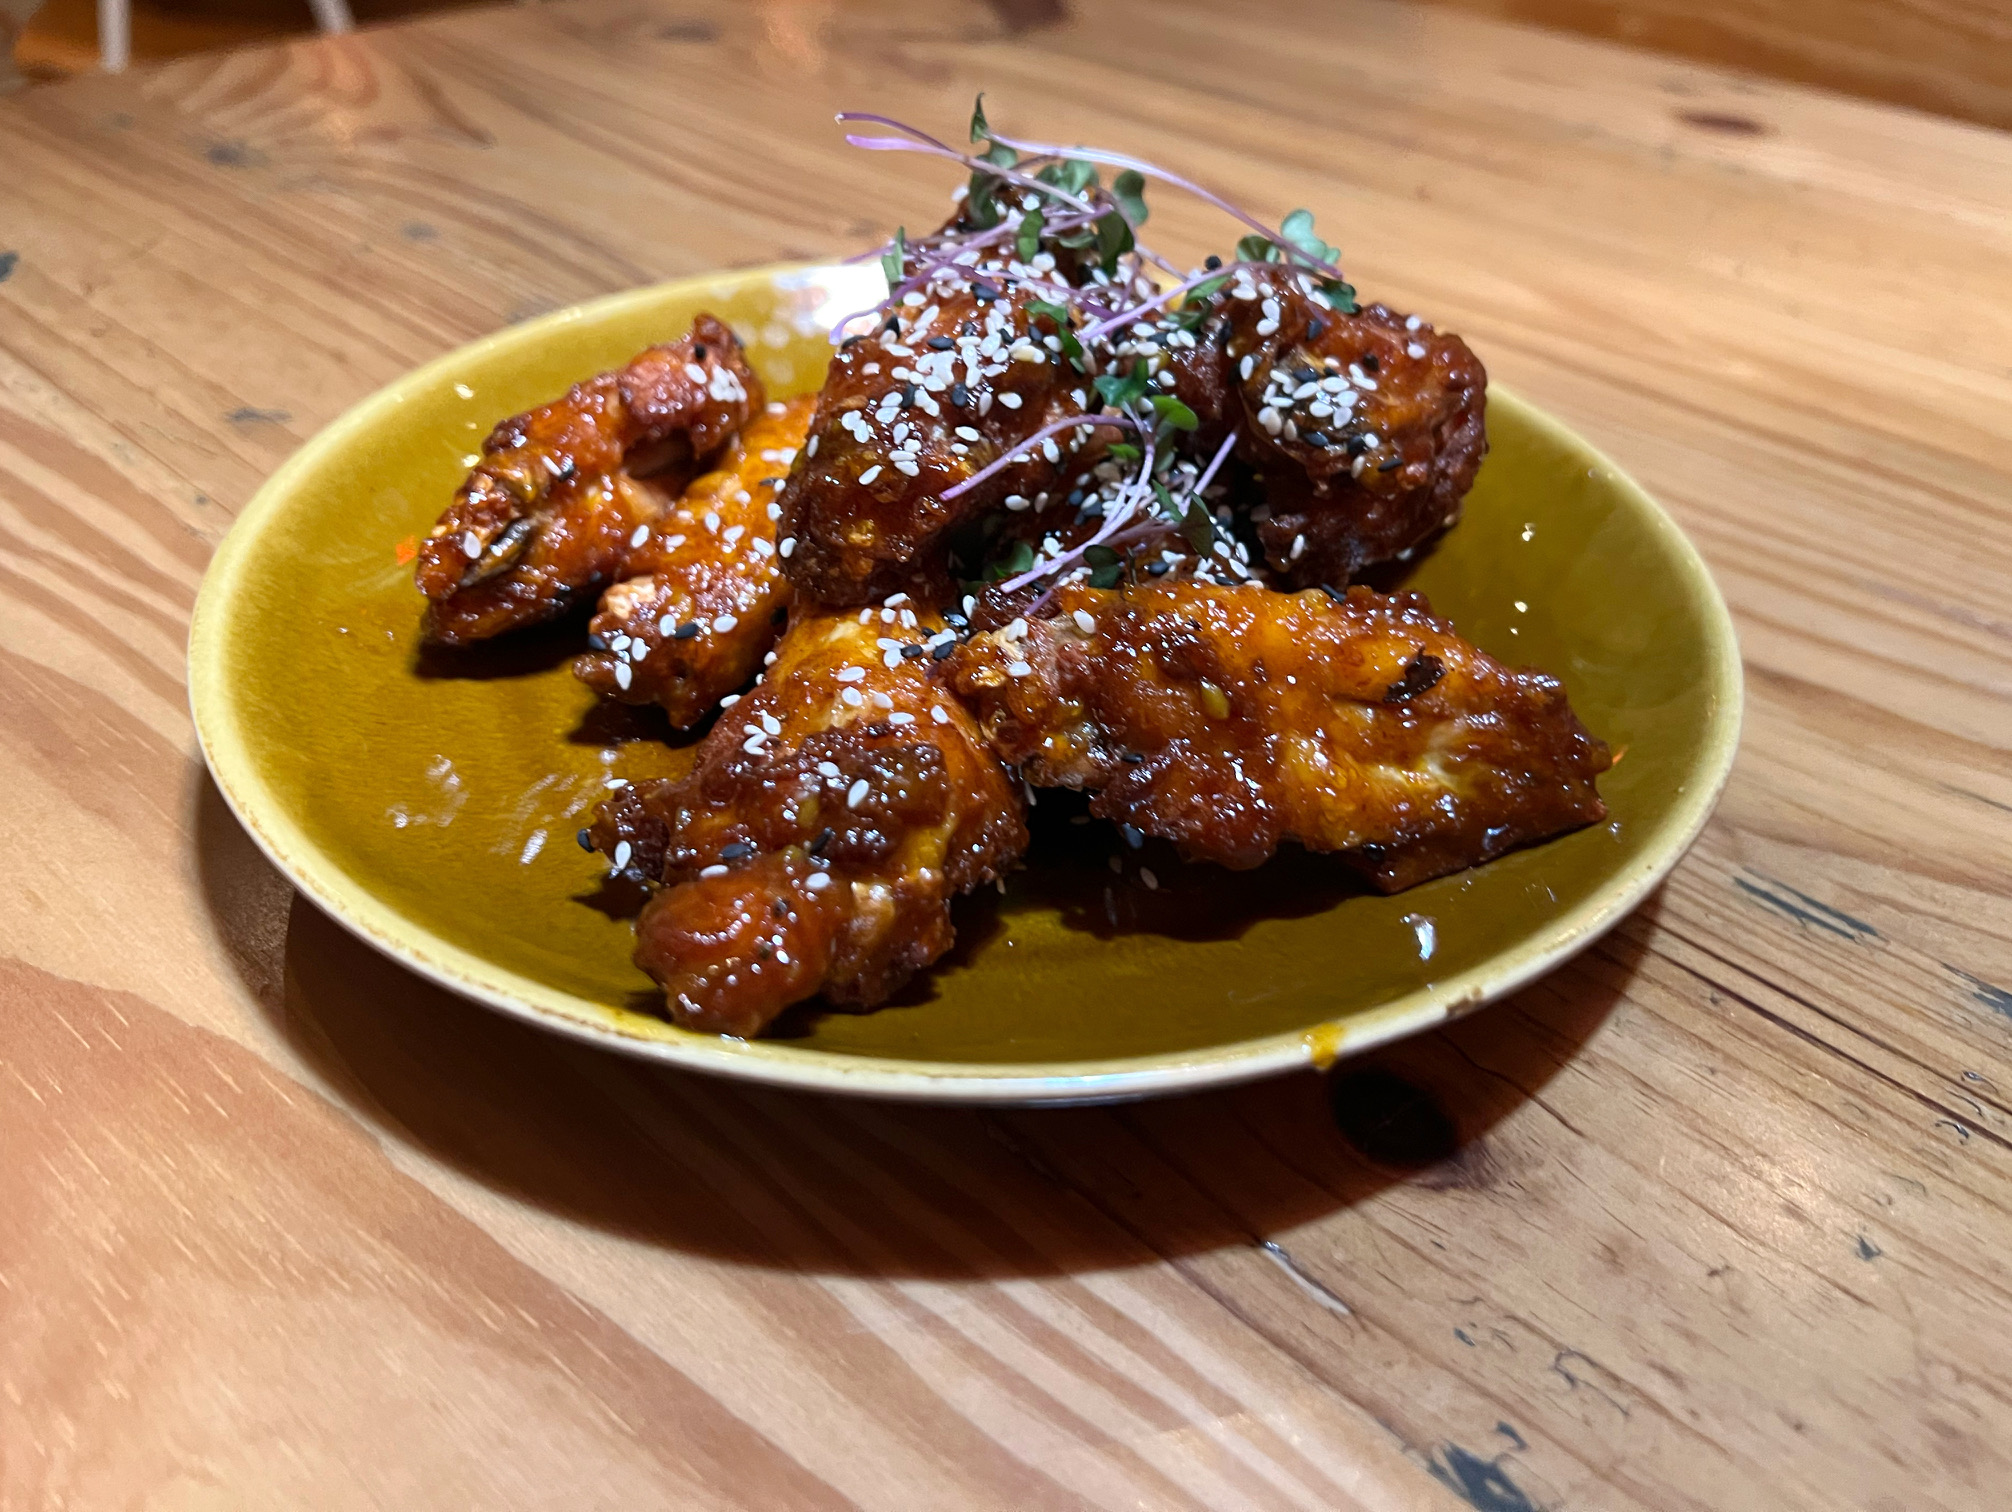 On a greenish-yellow plate there is an order of eight chicken wings prinkled with sesame seeds and microgreens. Photo by Alyssa Buckley.